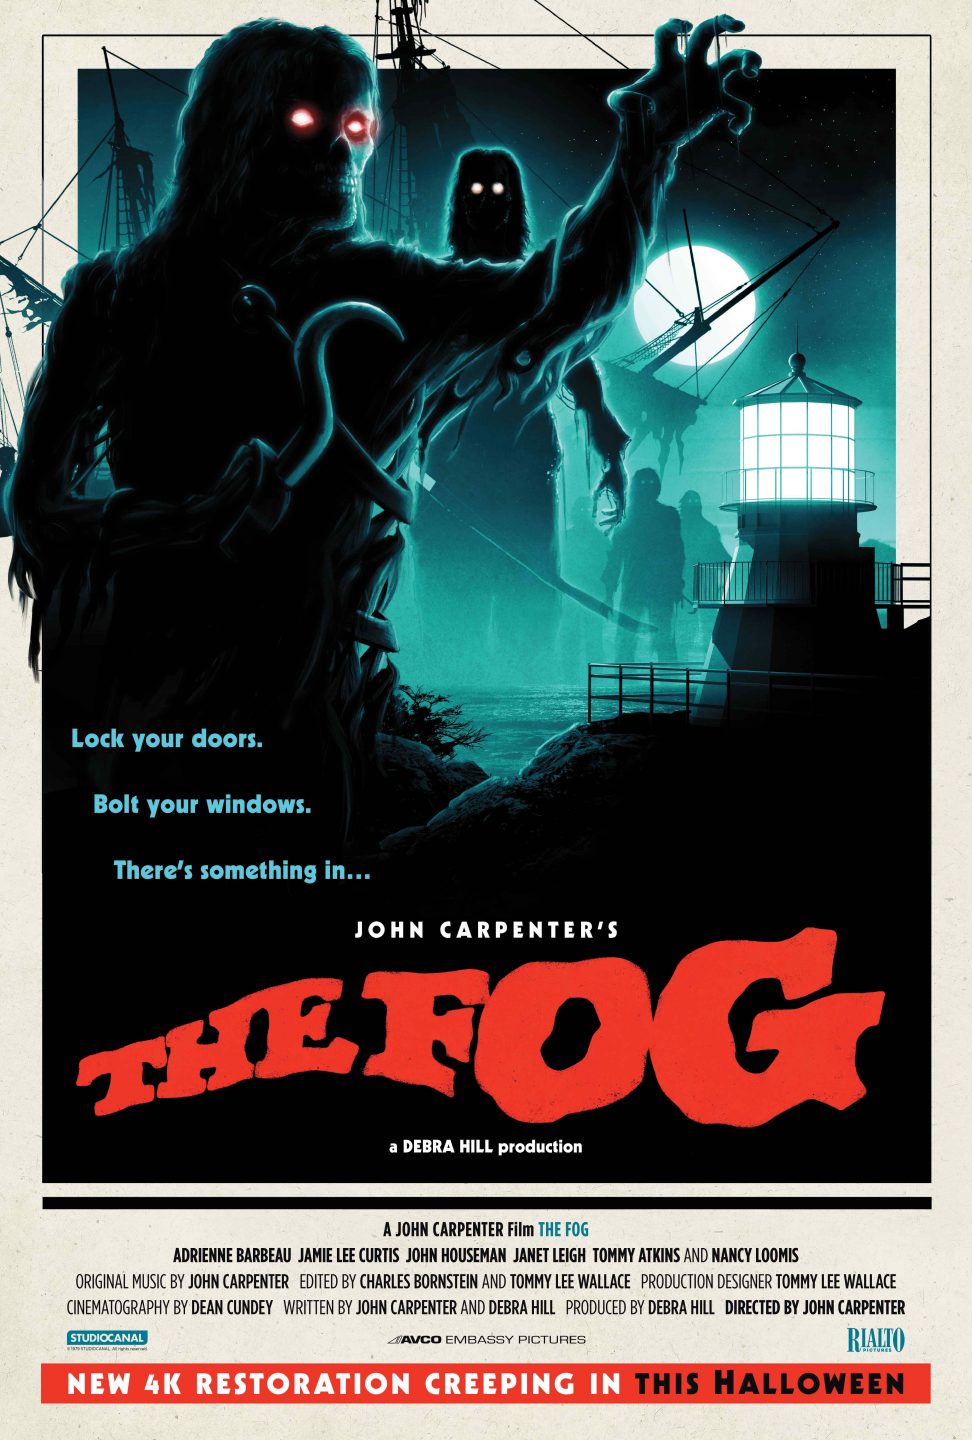 The Fog poster (Rialto Pictures/Studiocanal)